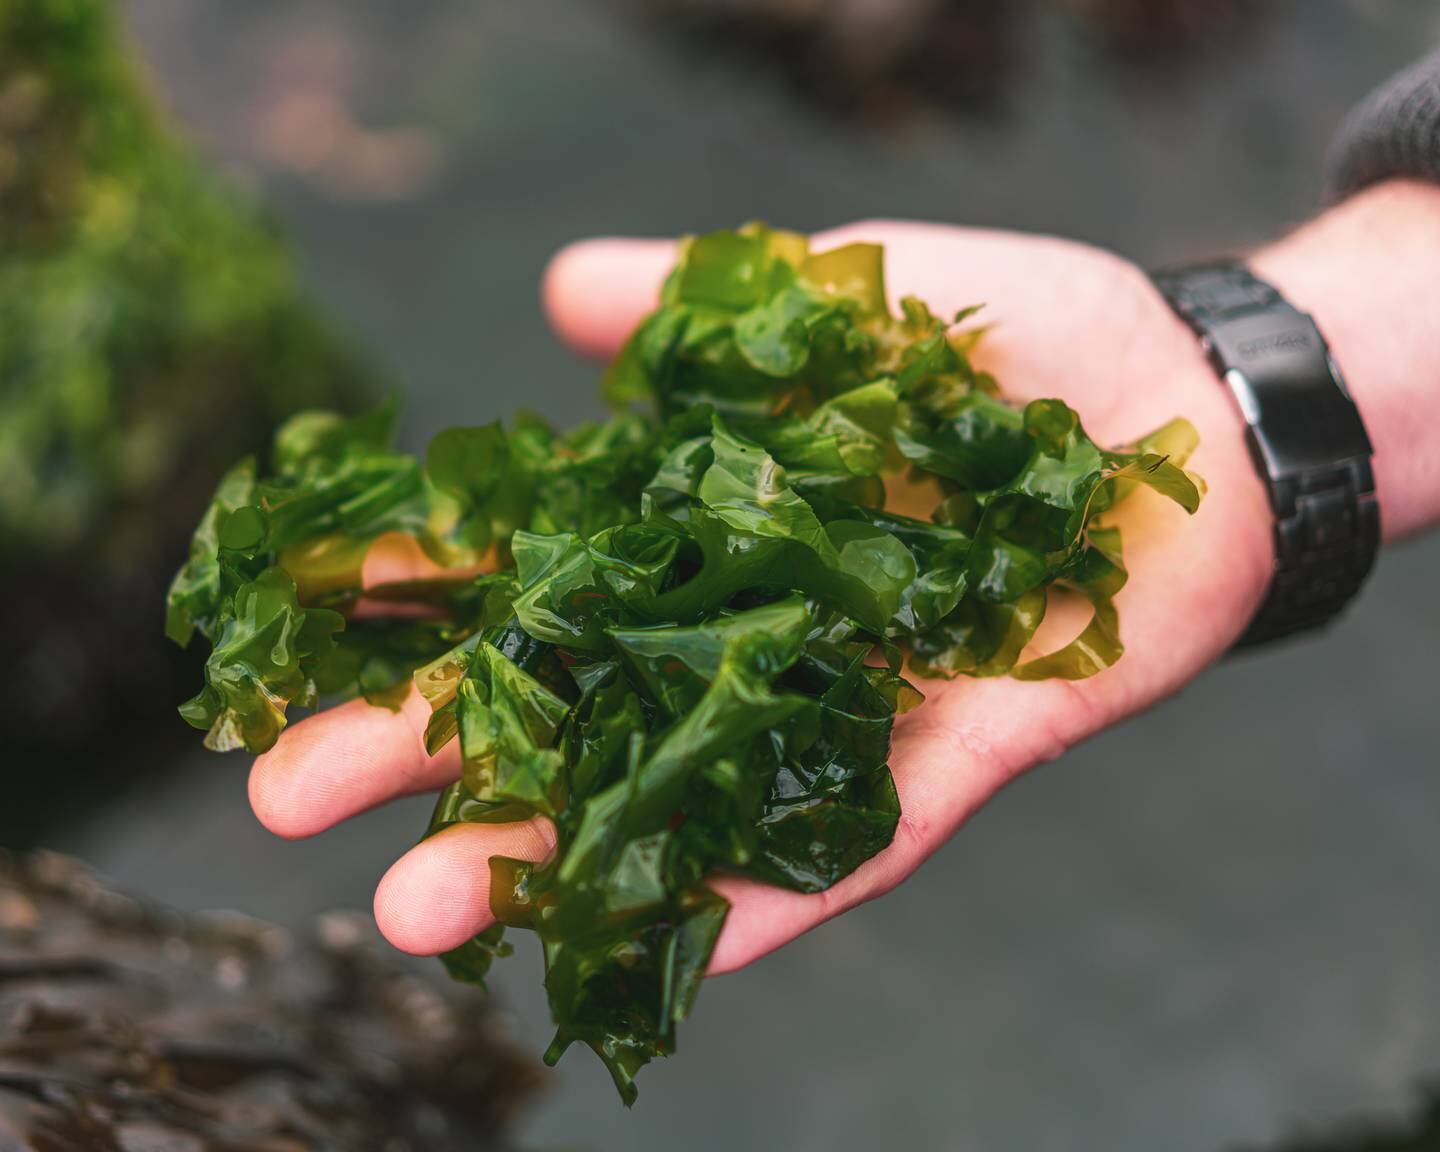 Seaweed collected from the East coast. Photo: SeaGrown